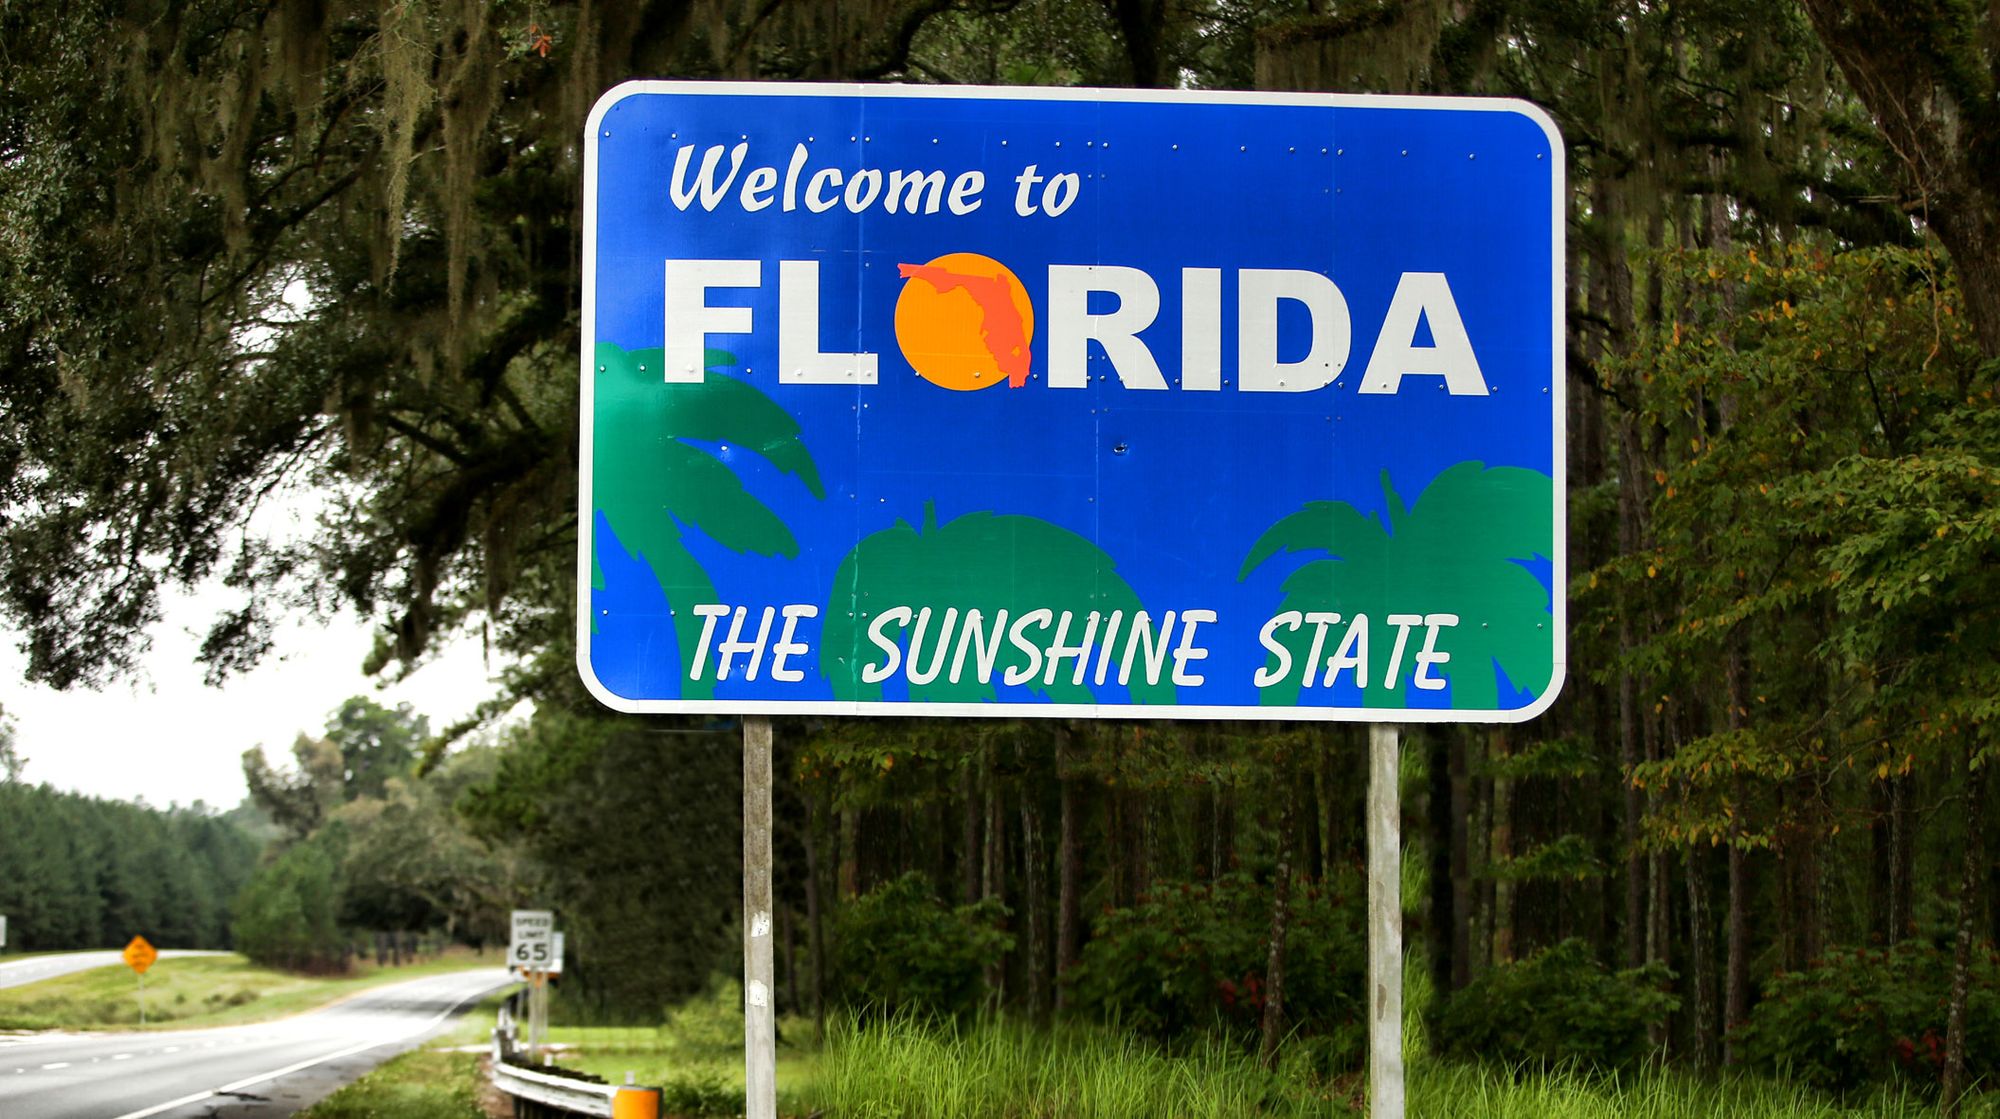 Relocate to Florida? What to Consider Before Selling Your House